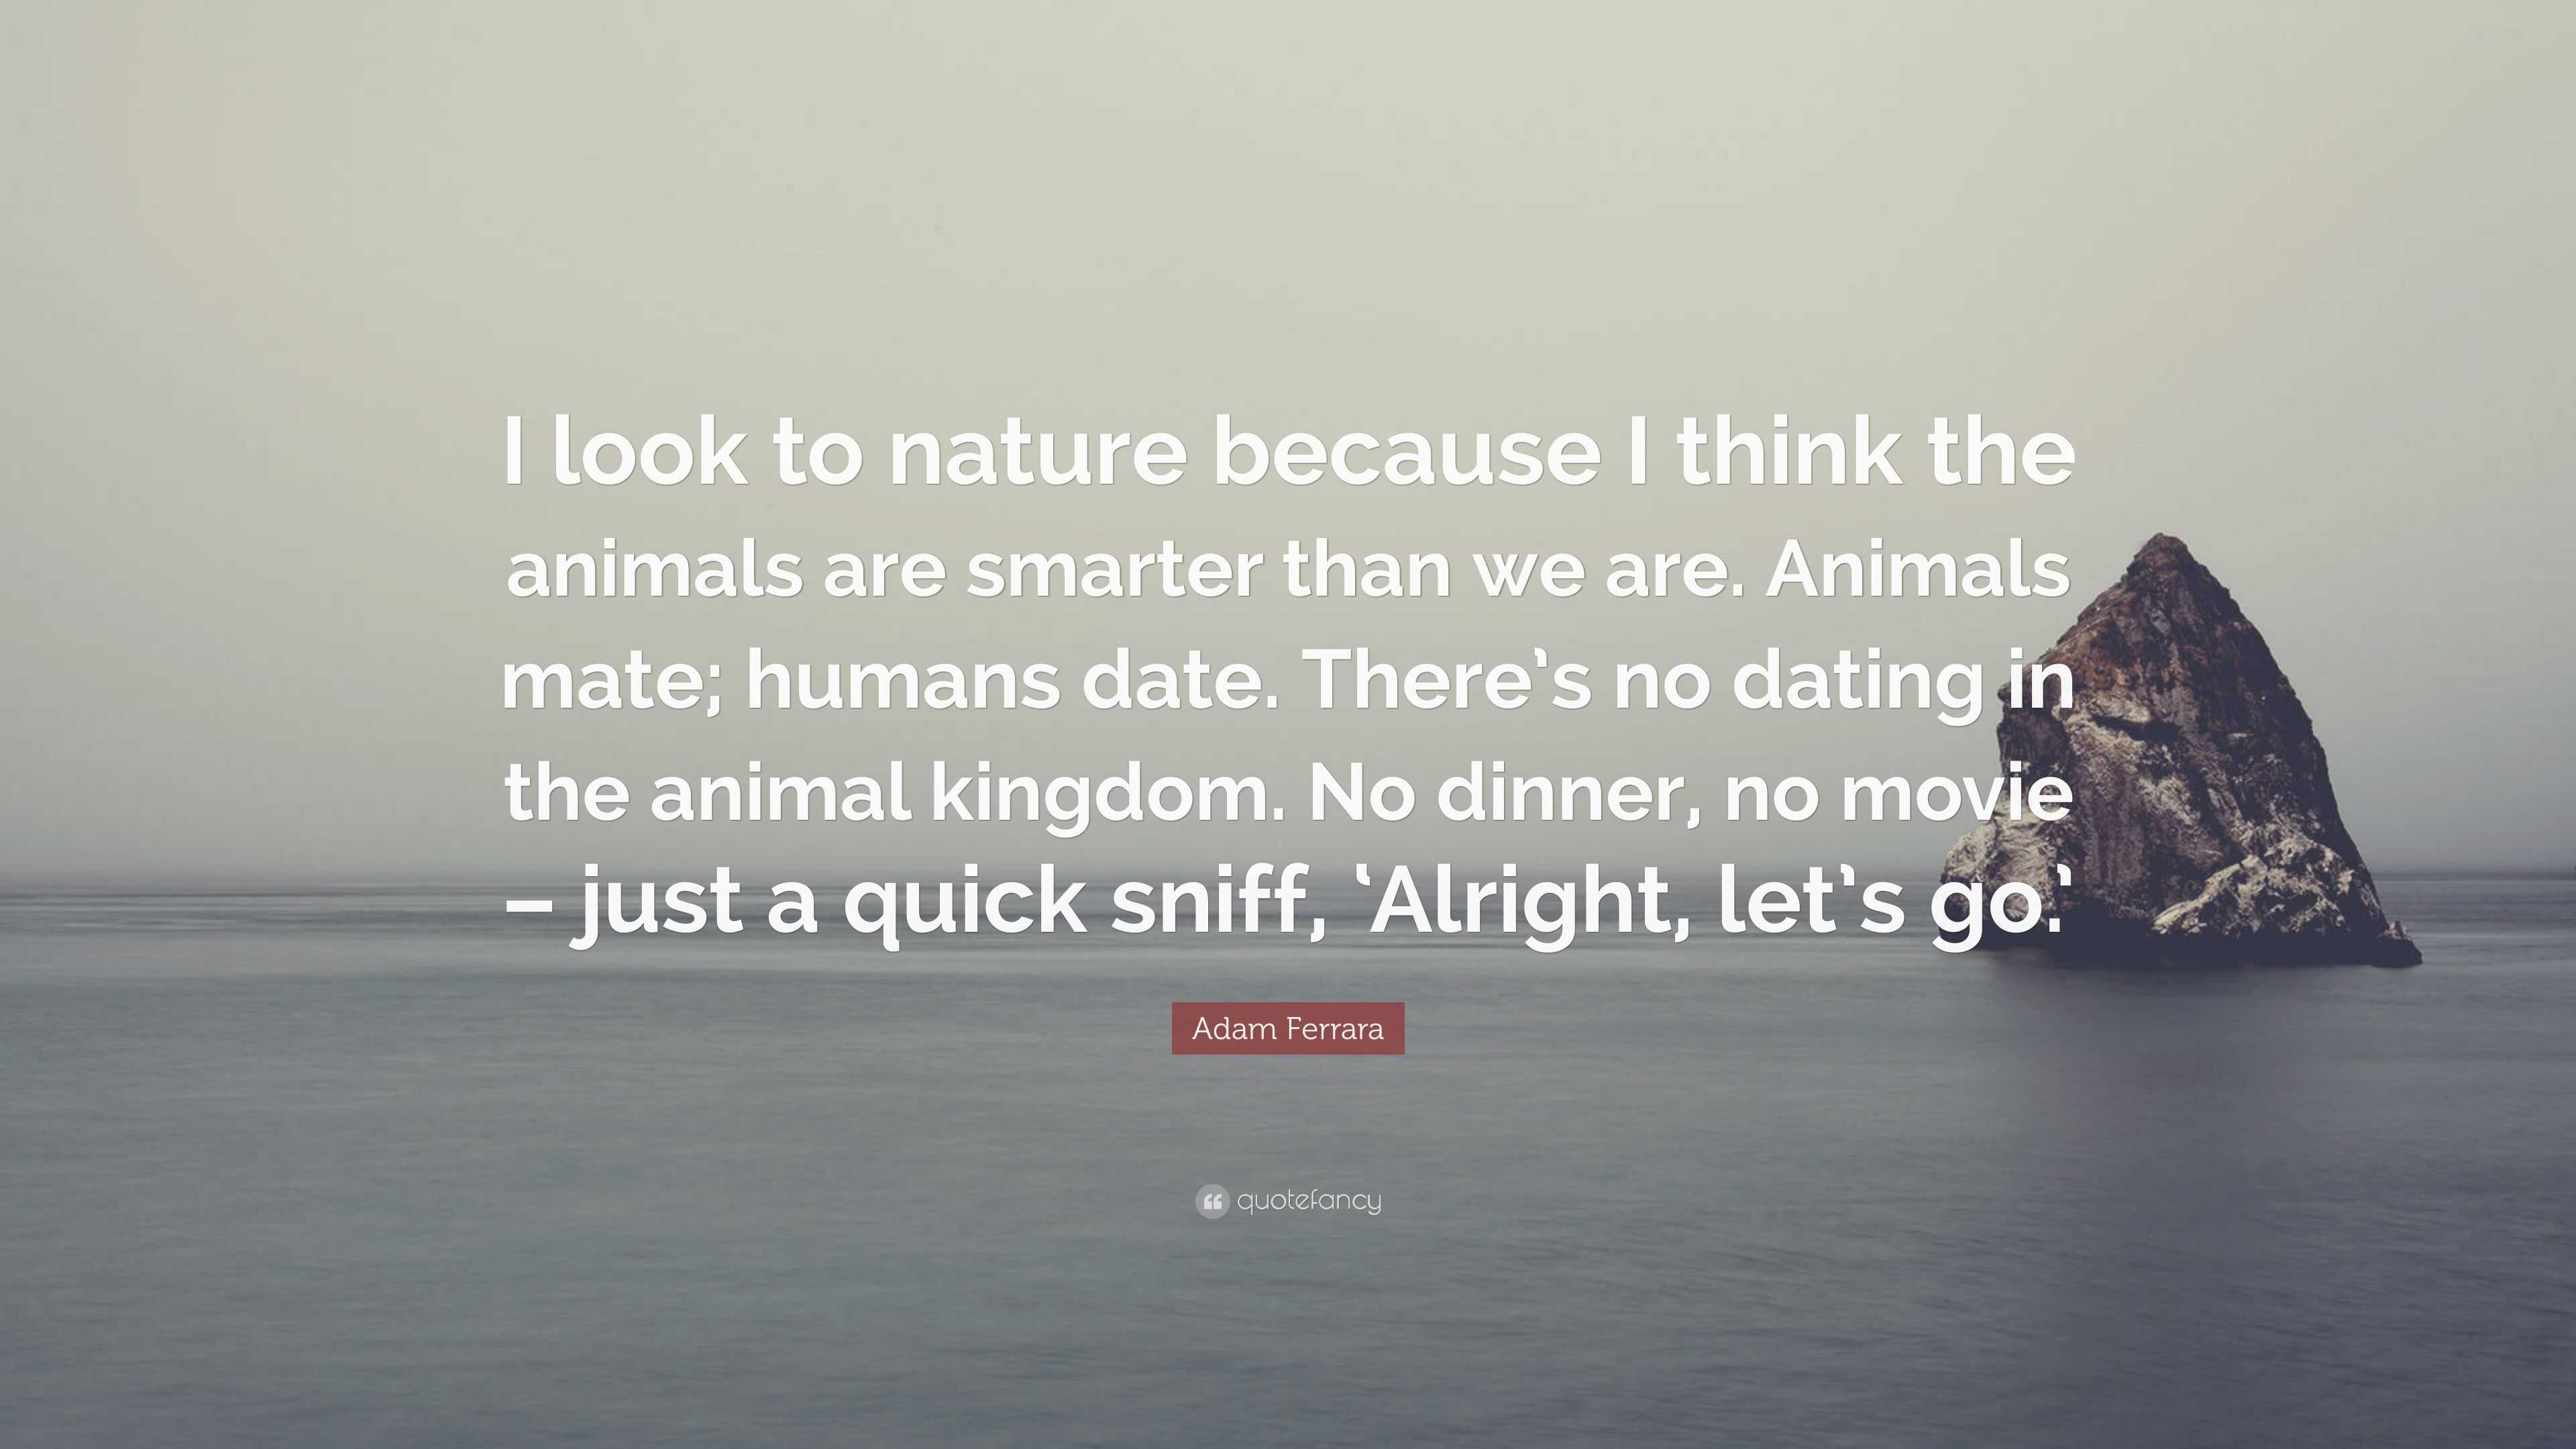 Adam Ferrara Quote: “I look to nature because I think the animals are smarter  than we are. Animals mate; humans date. There's no dating in th...”